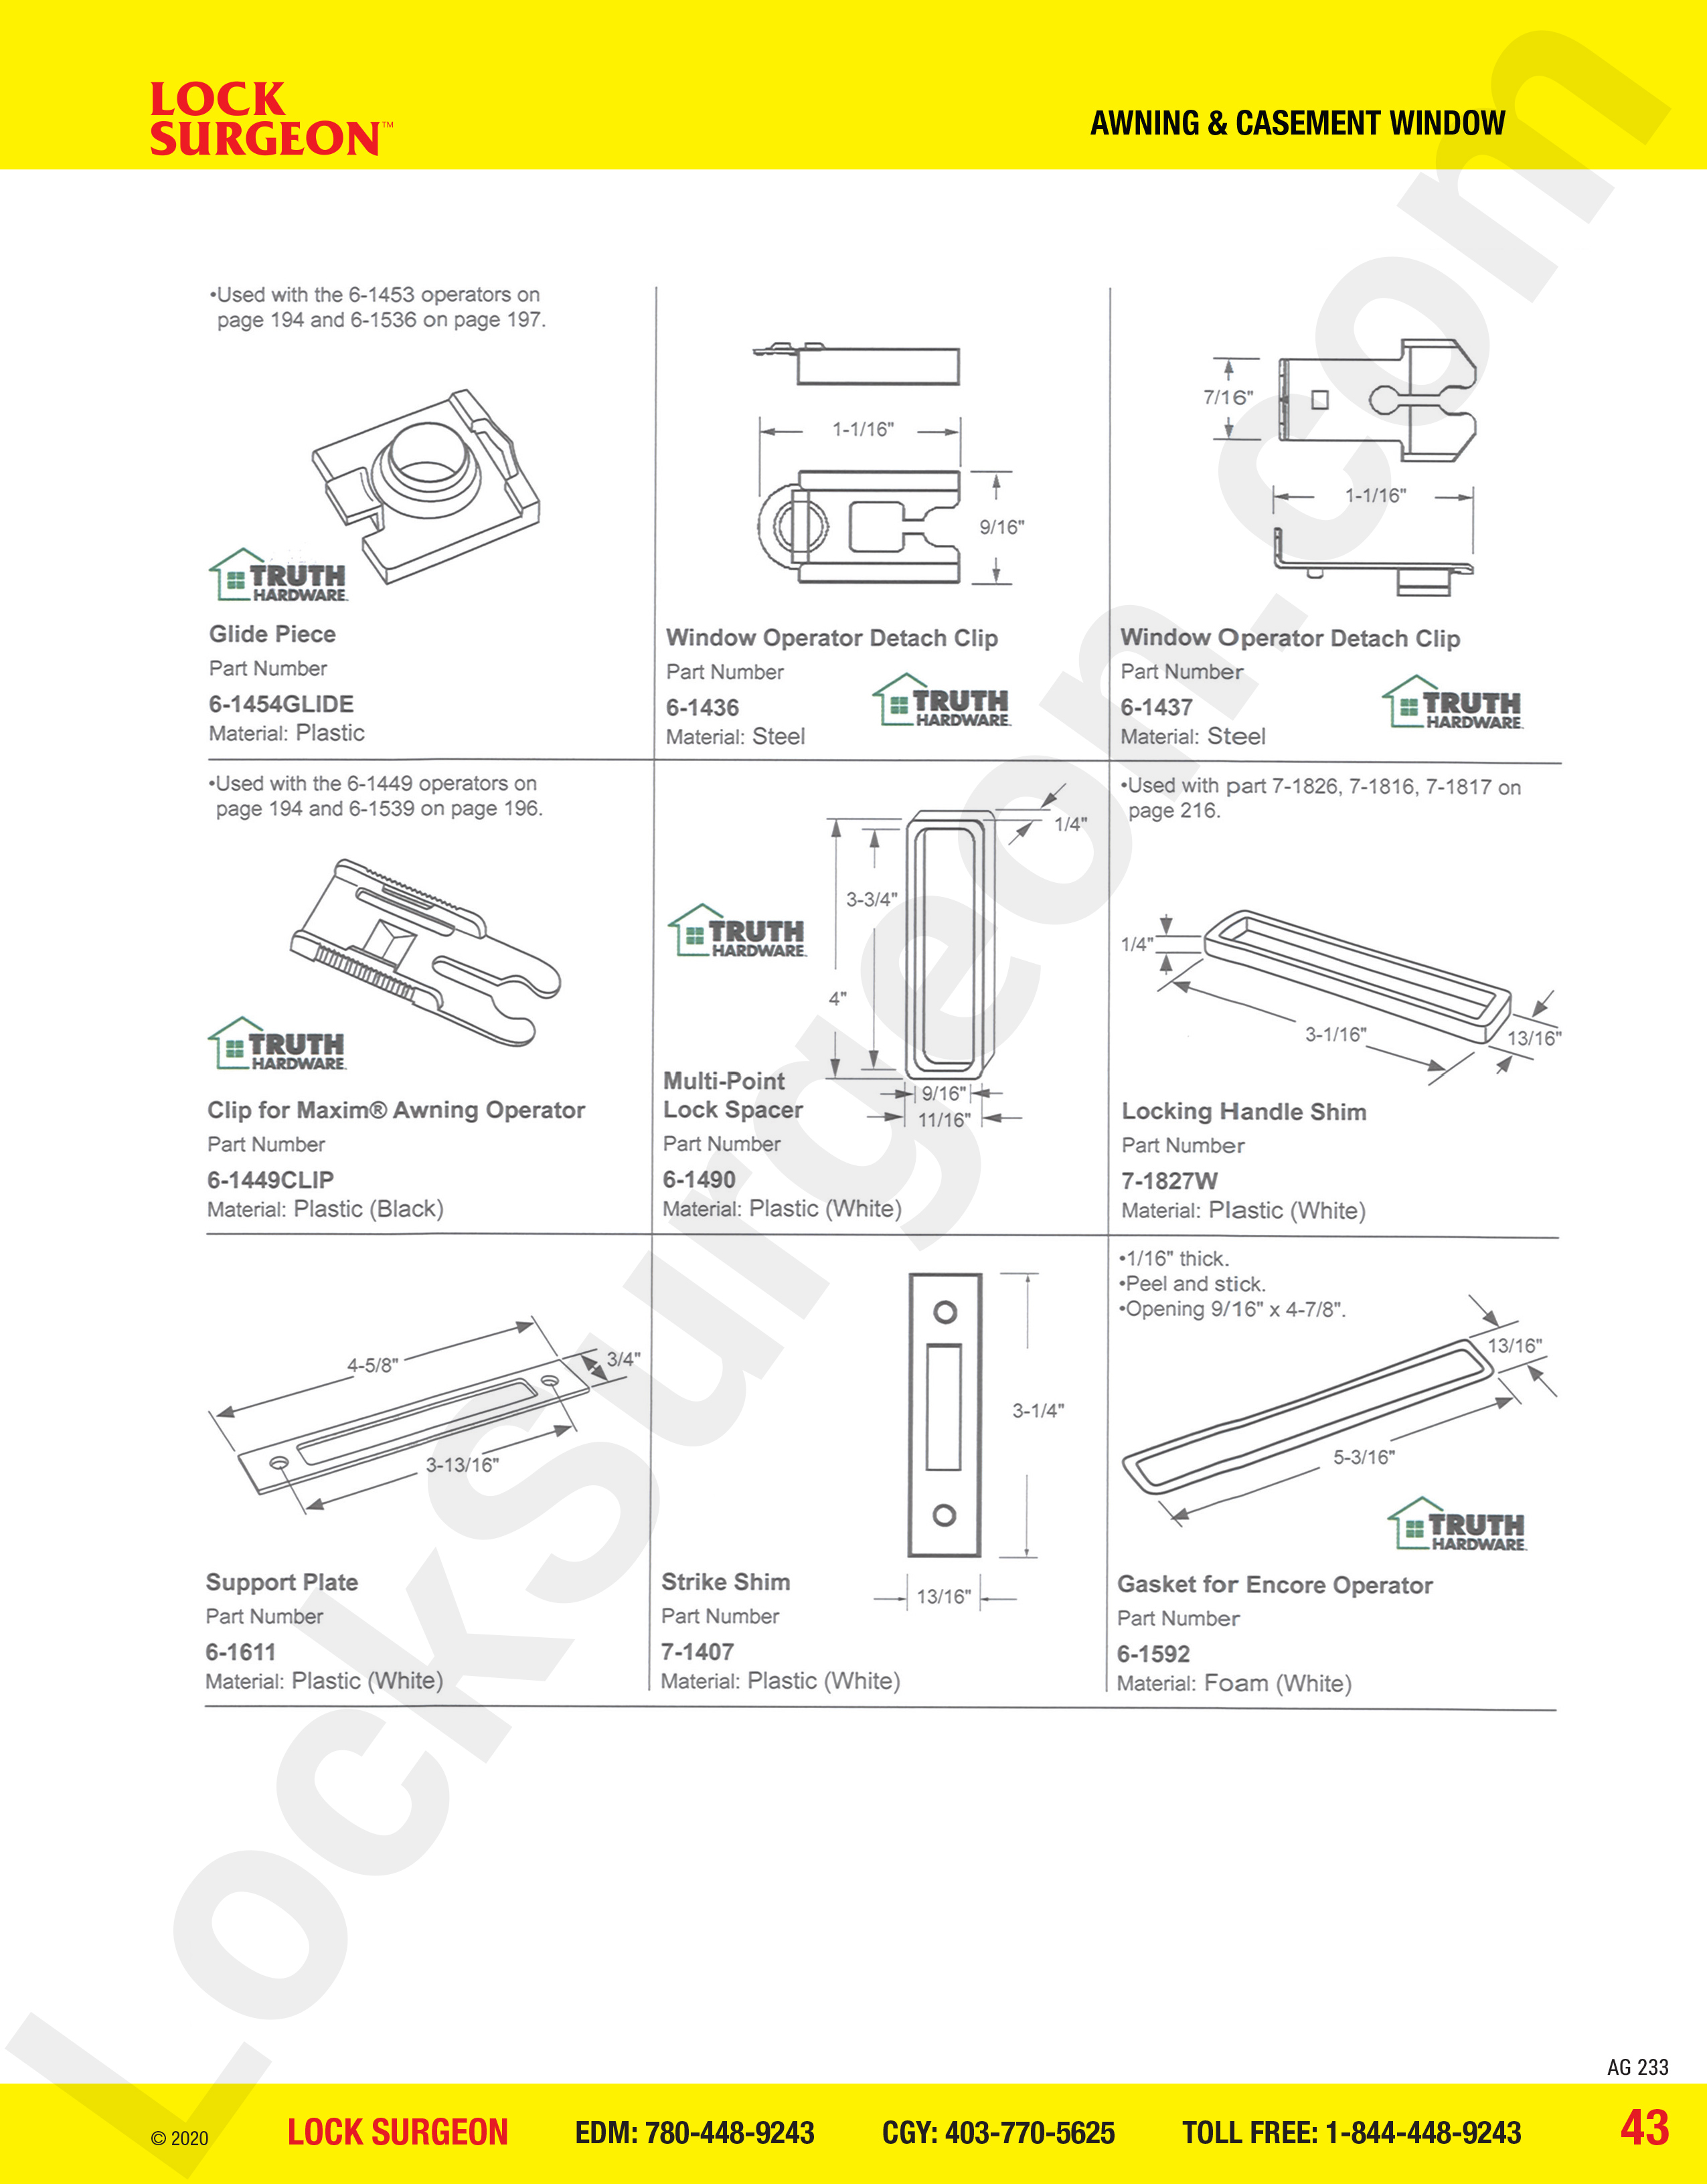 Acheson mobile awning and casement window parts for clips, shims and spacers